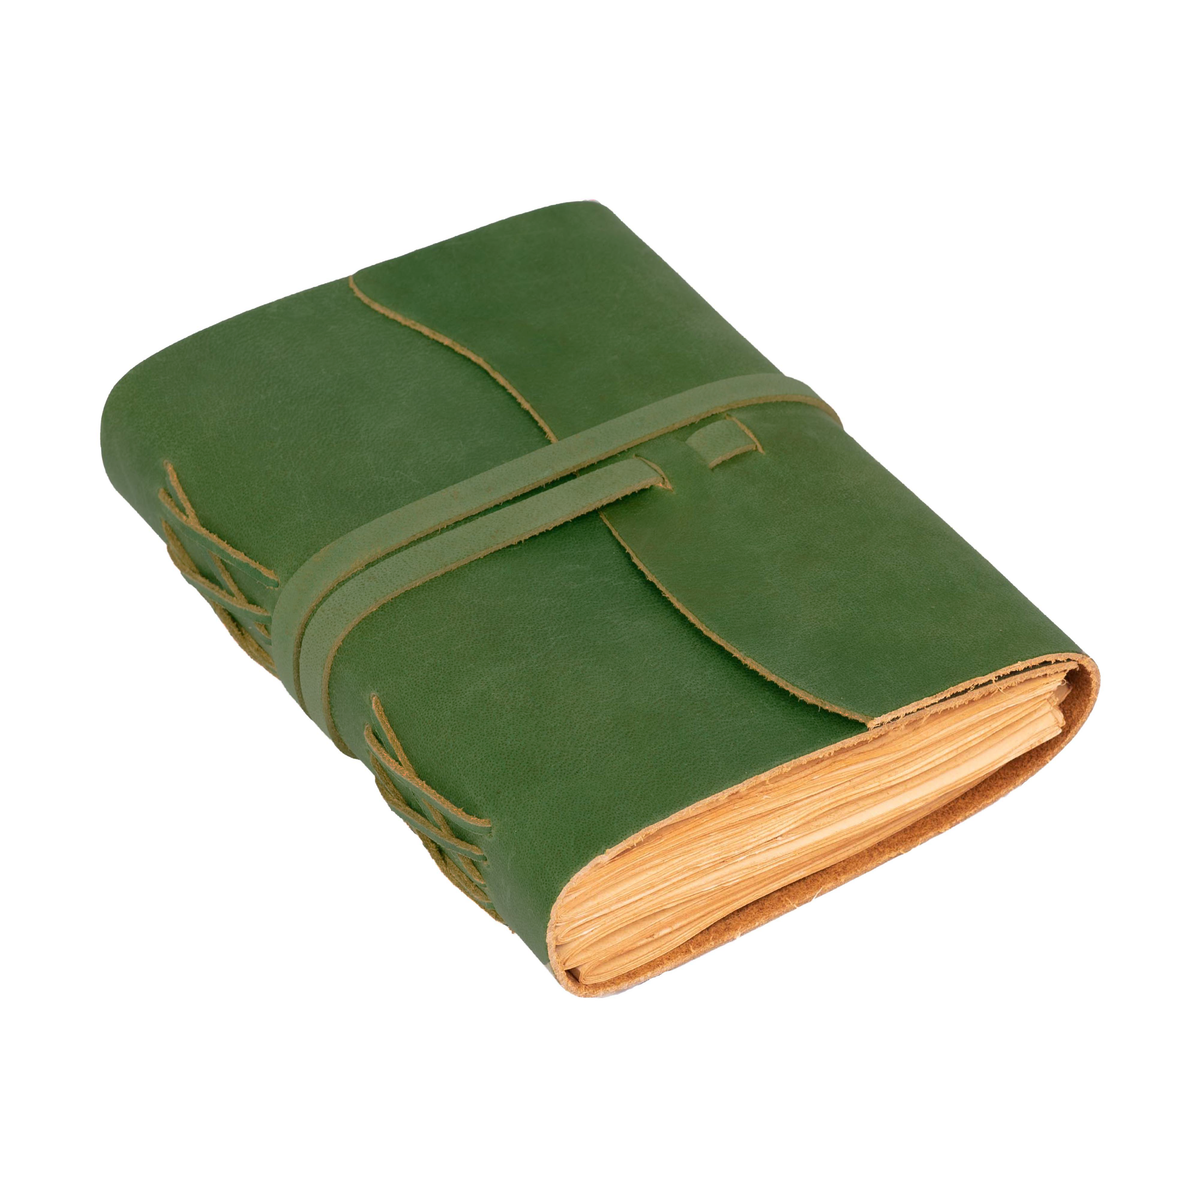 Green Color - Leather Bound Travel Journal Notebook Planner - Blank Paper - 220 Pages